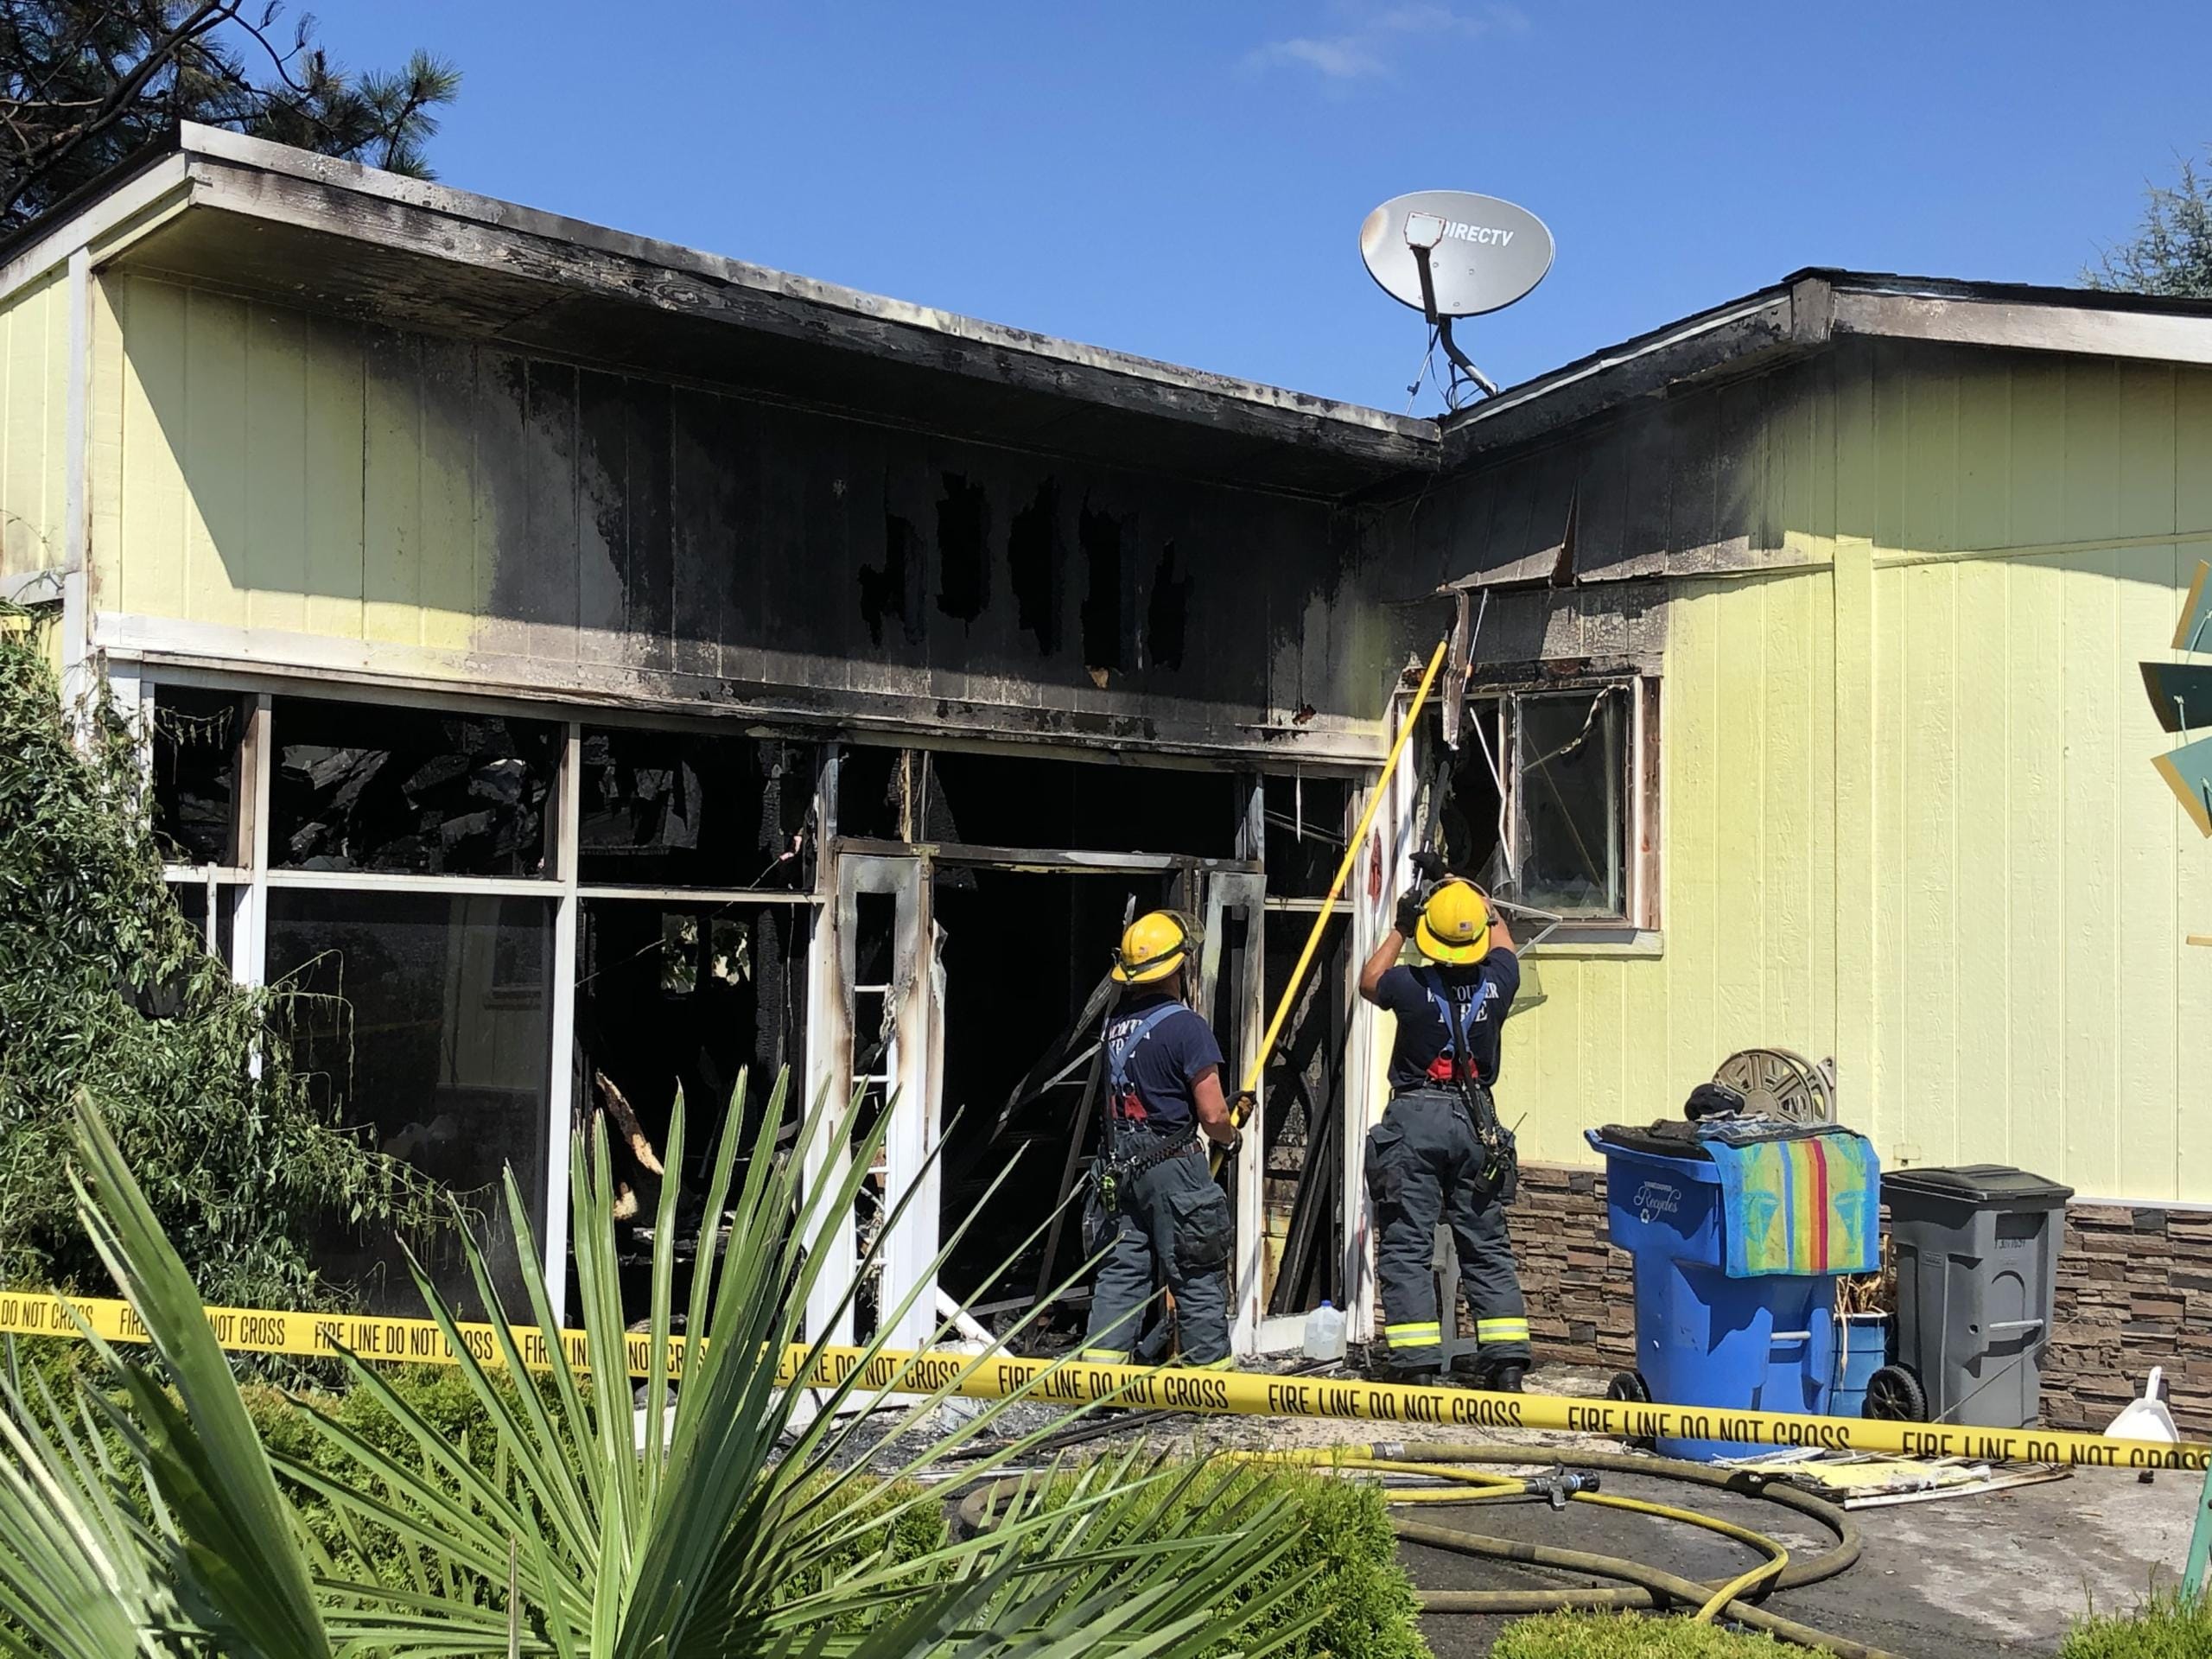 Vancouver Fire Department crews were dispatched at 9:49 a.m. Tuesday, Aug. 4, to 13217 N.E. 59th St., Sky Ridge Estates mobile home park, for the report of a residential fire. Firefighters extinguished a mobile home fire and rescued a cat.